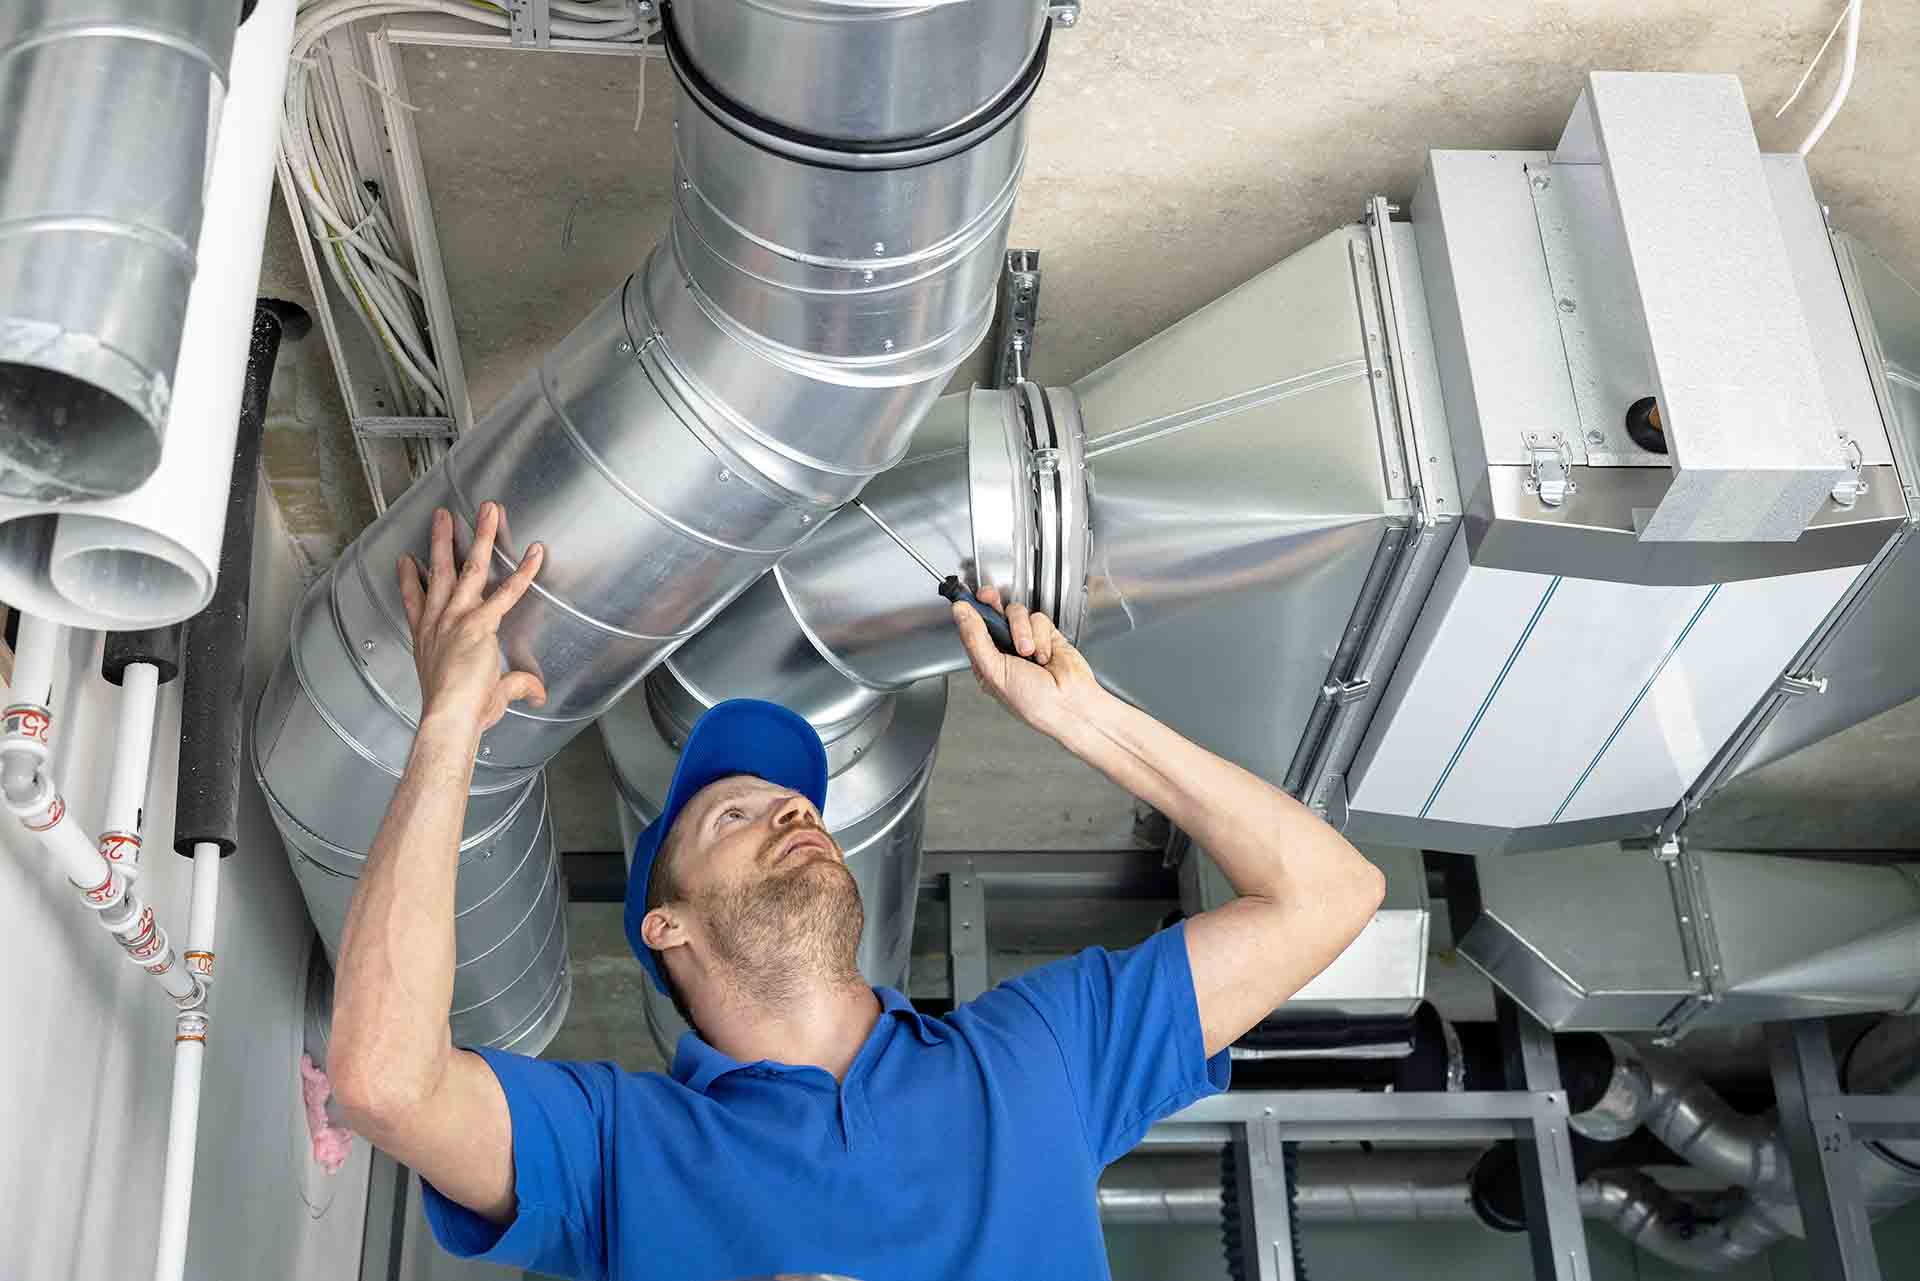 HVAC Consultants in Hyderabad , MS AIR SYSTEMS 8801112229 HVAC Consultancy Service in Hyderabad,HVAC Manufacturers in Hyderabad | M S Air Systems | HVAC Consultants in hyderabad,HVAC Consultancy services in hyderabad,hvac manufacturers in hyderabad,HVAC Consultants in vijayawada,HVAC Consultants in visakhapatnam,HVAC Consultants in  vizag - GL111010